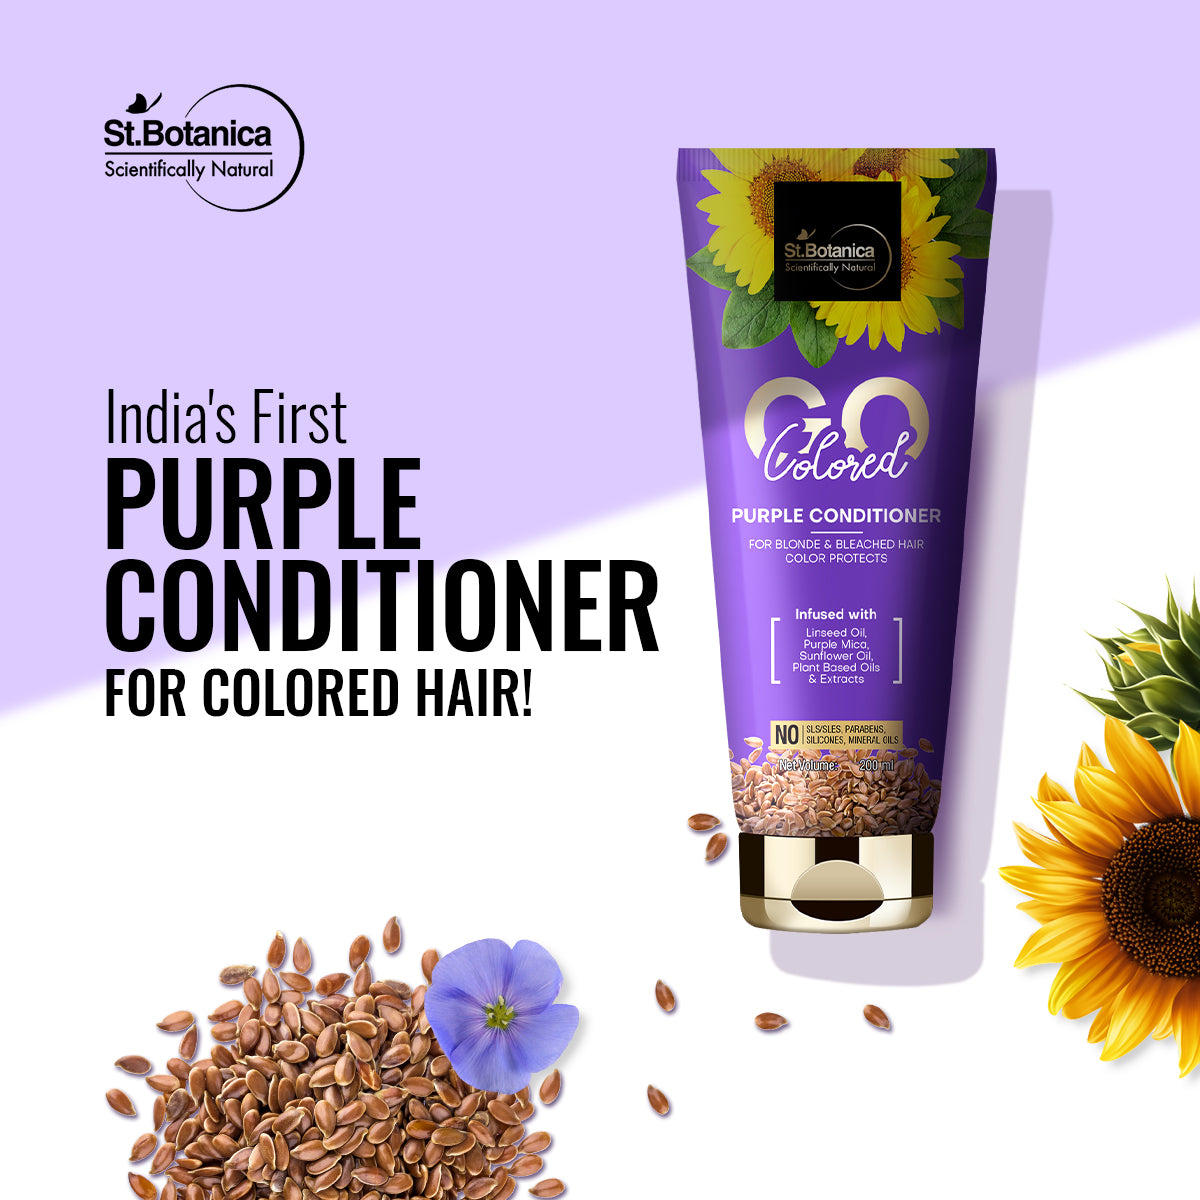 St.Botanica GO Colored Purple Hair Conditioner - With Linseed, Purple Mica, Sunflower Oil, No SLS/Sulphate, Paraben, Silicones, Colors, 200ml